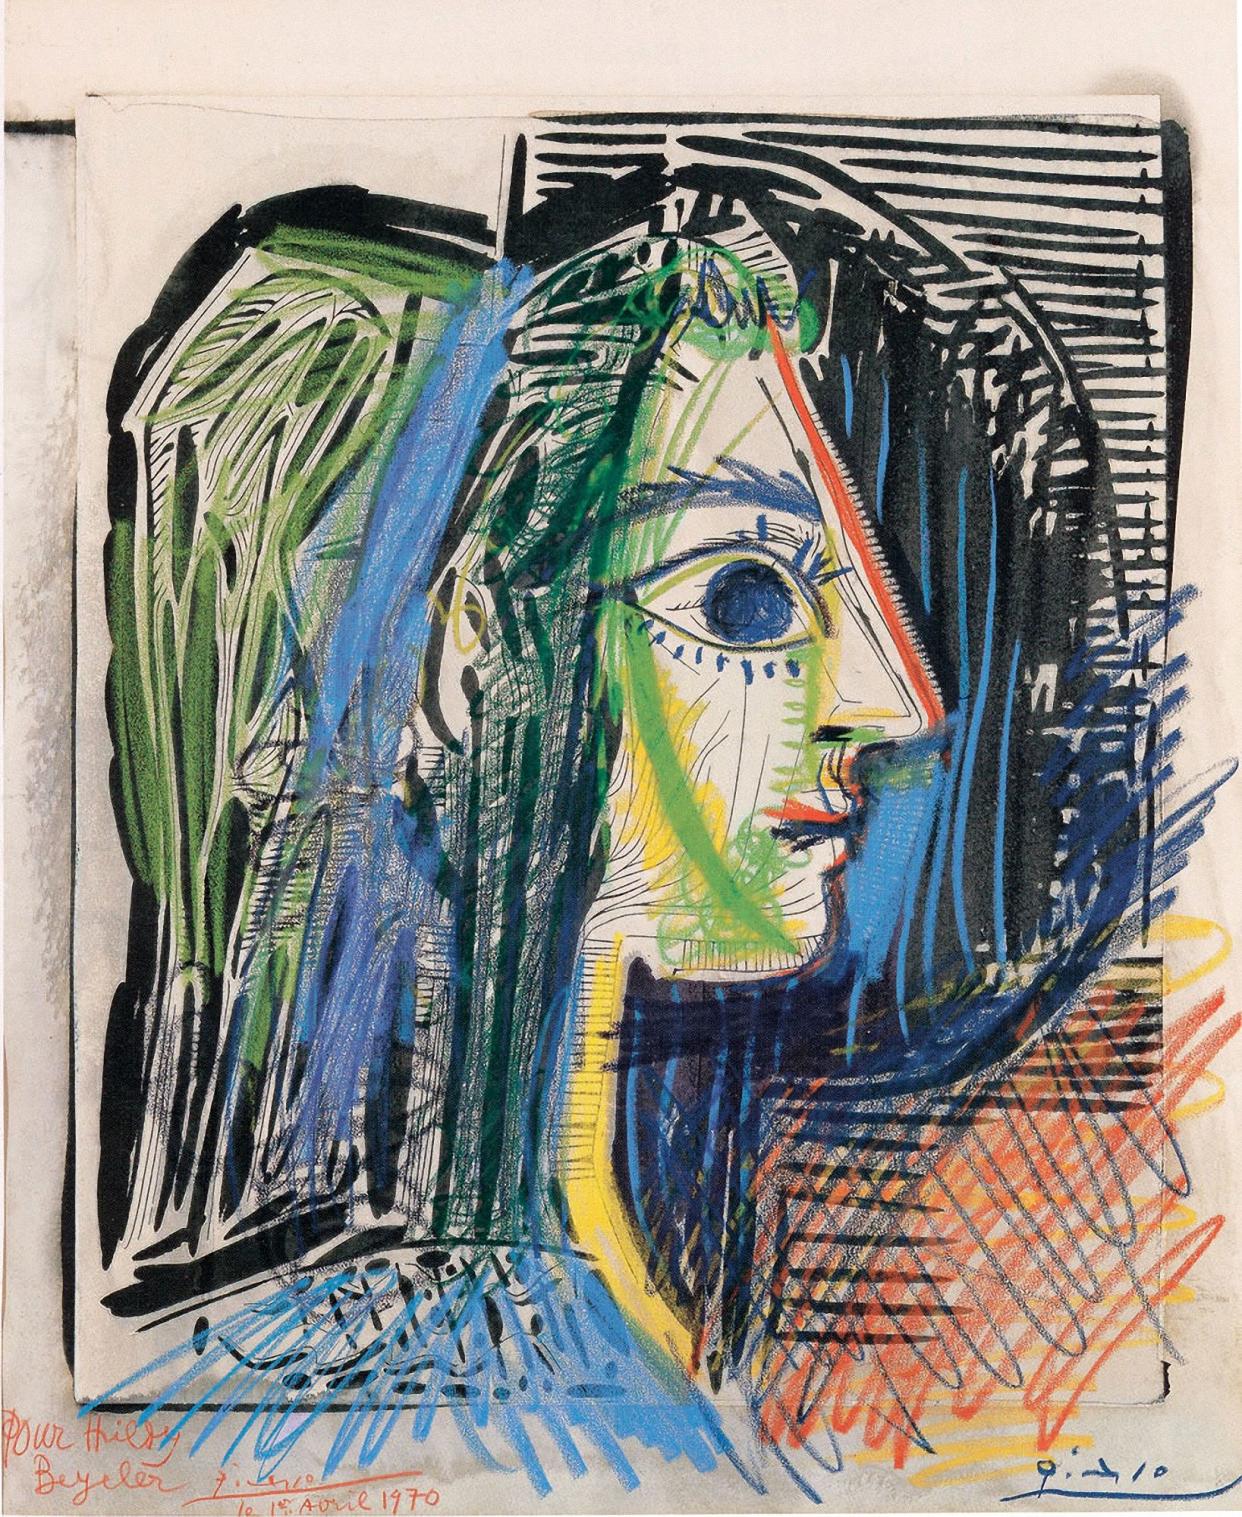 Profile of Woman (Jacqueline) linocut and ink by Pablo Picasso